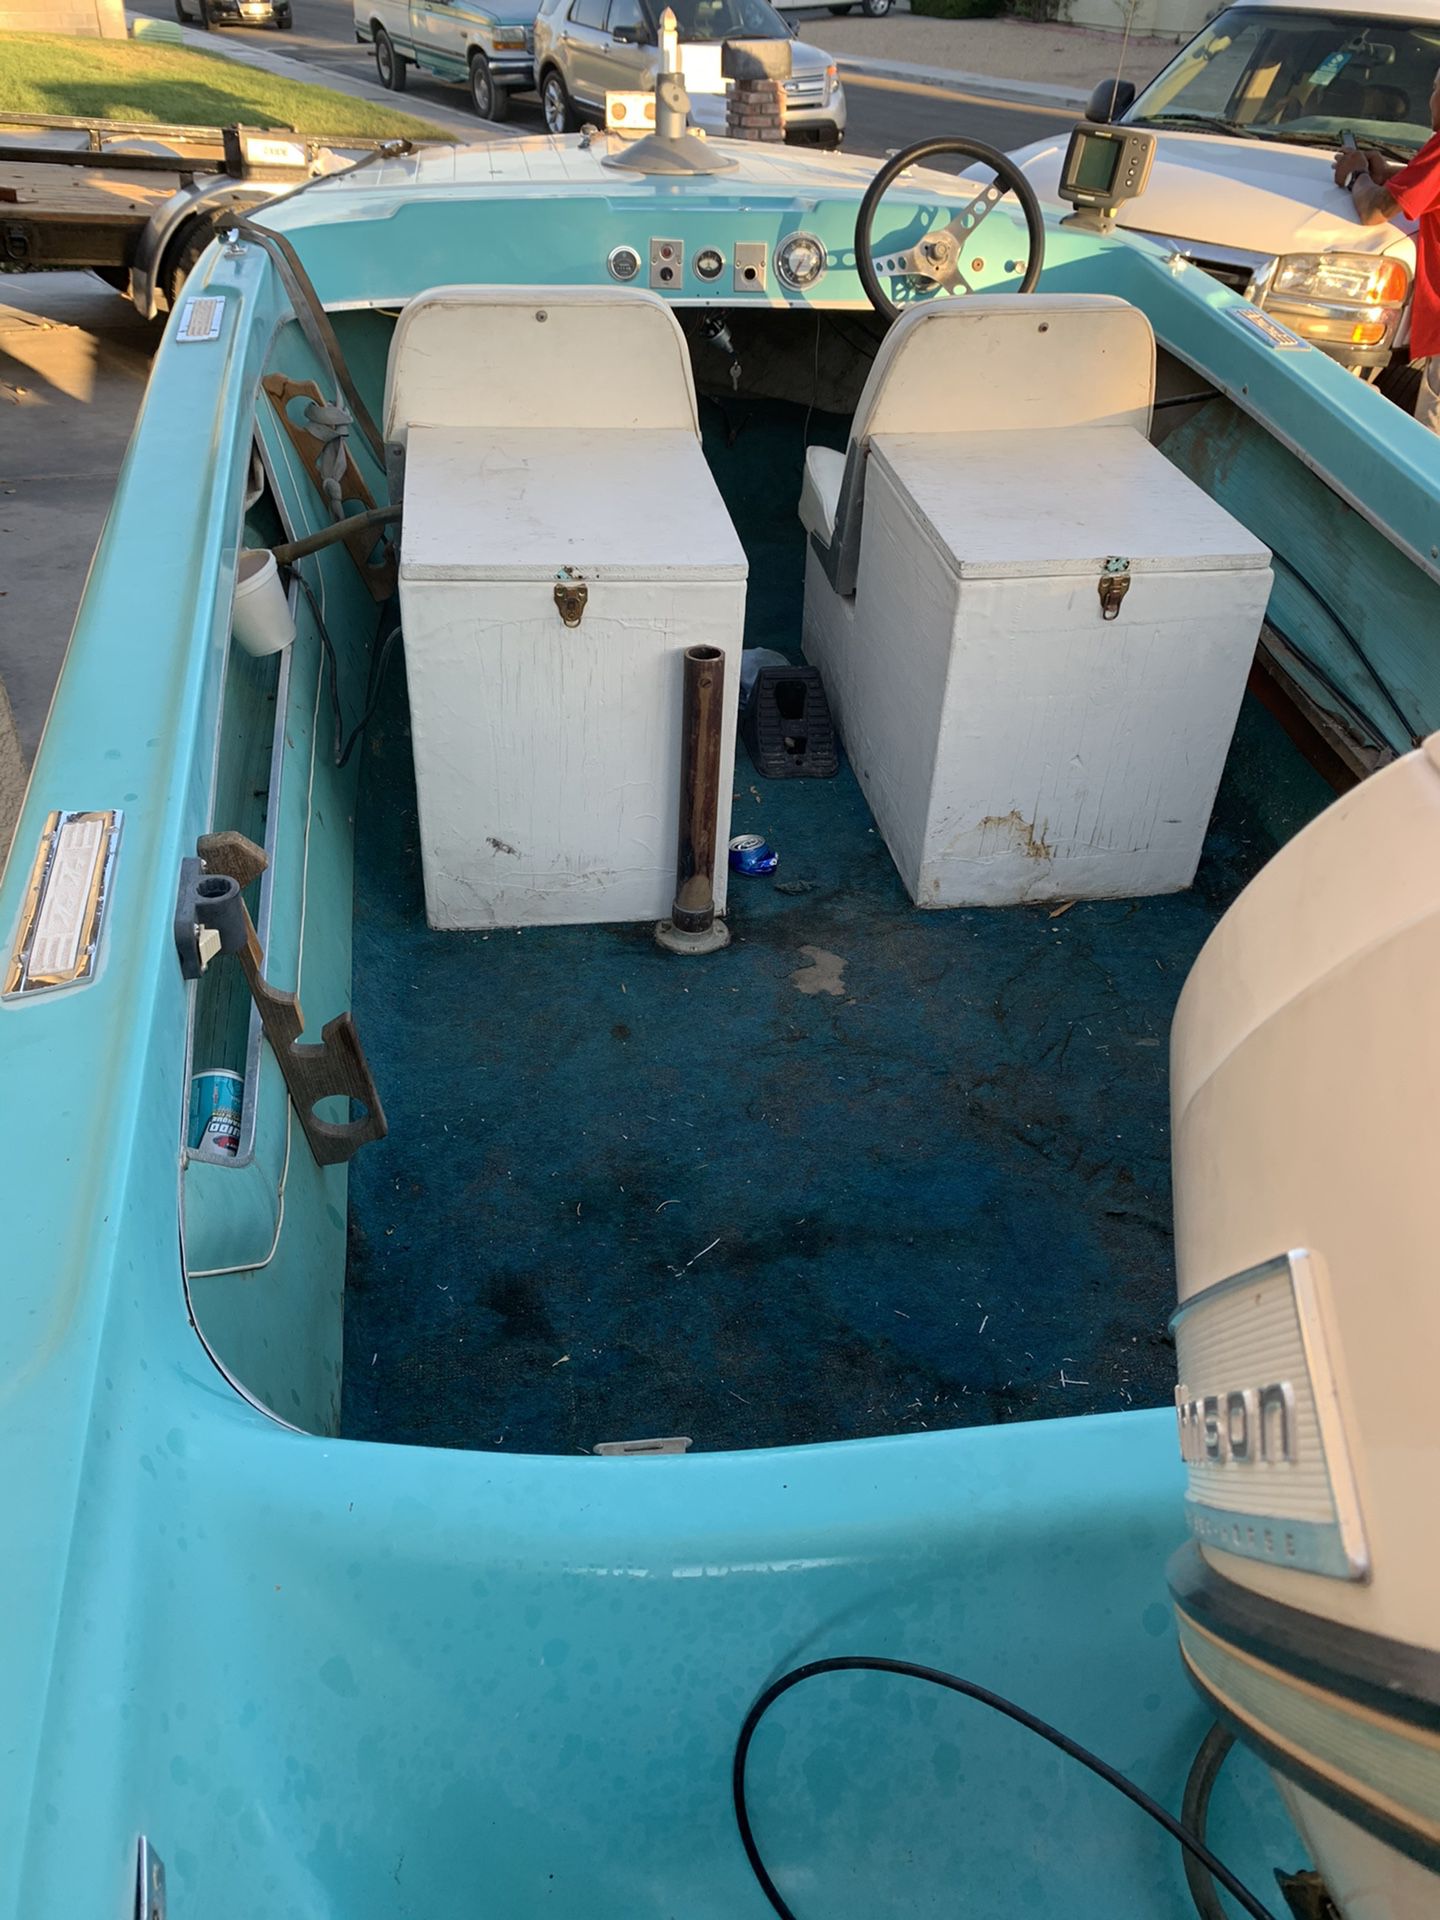 !!!Needs a new ignition switch, runs, and strong motor, all original’1965 P14 seawirl. Title for boat and trailer trailer has permanent plates from C